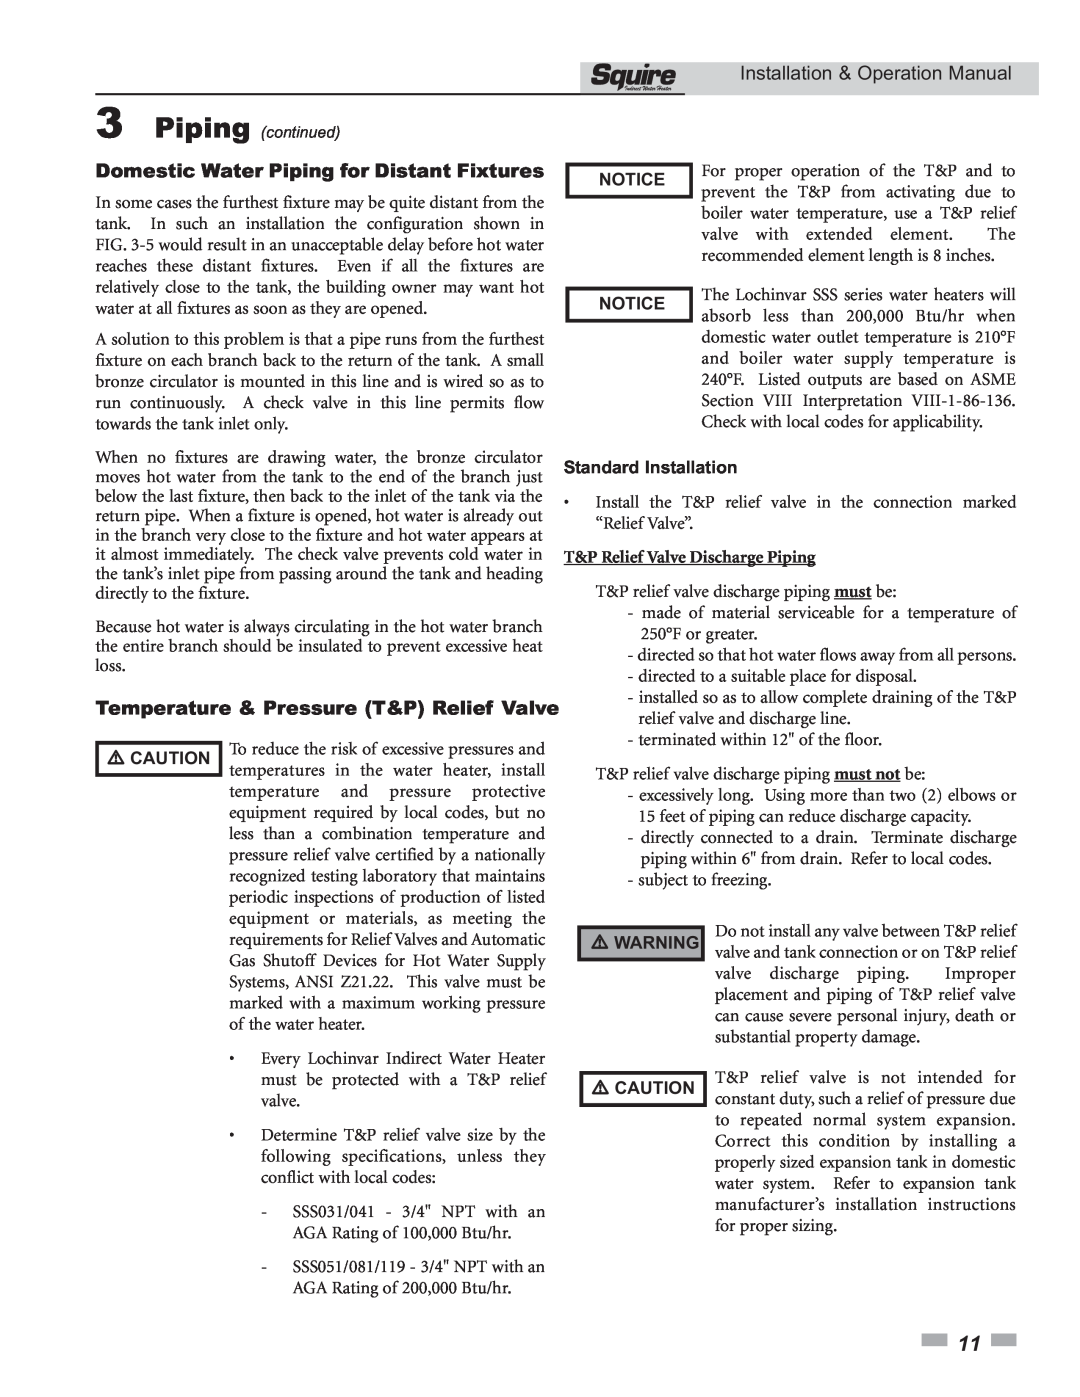 Lochinvar SSS051 Domestic Water Piping for Distant Fixtures, Temperature & Pressure T&P Relief Valve, Notice Notice 